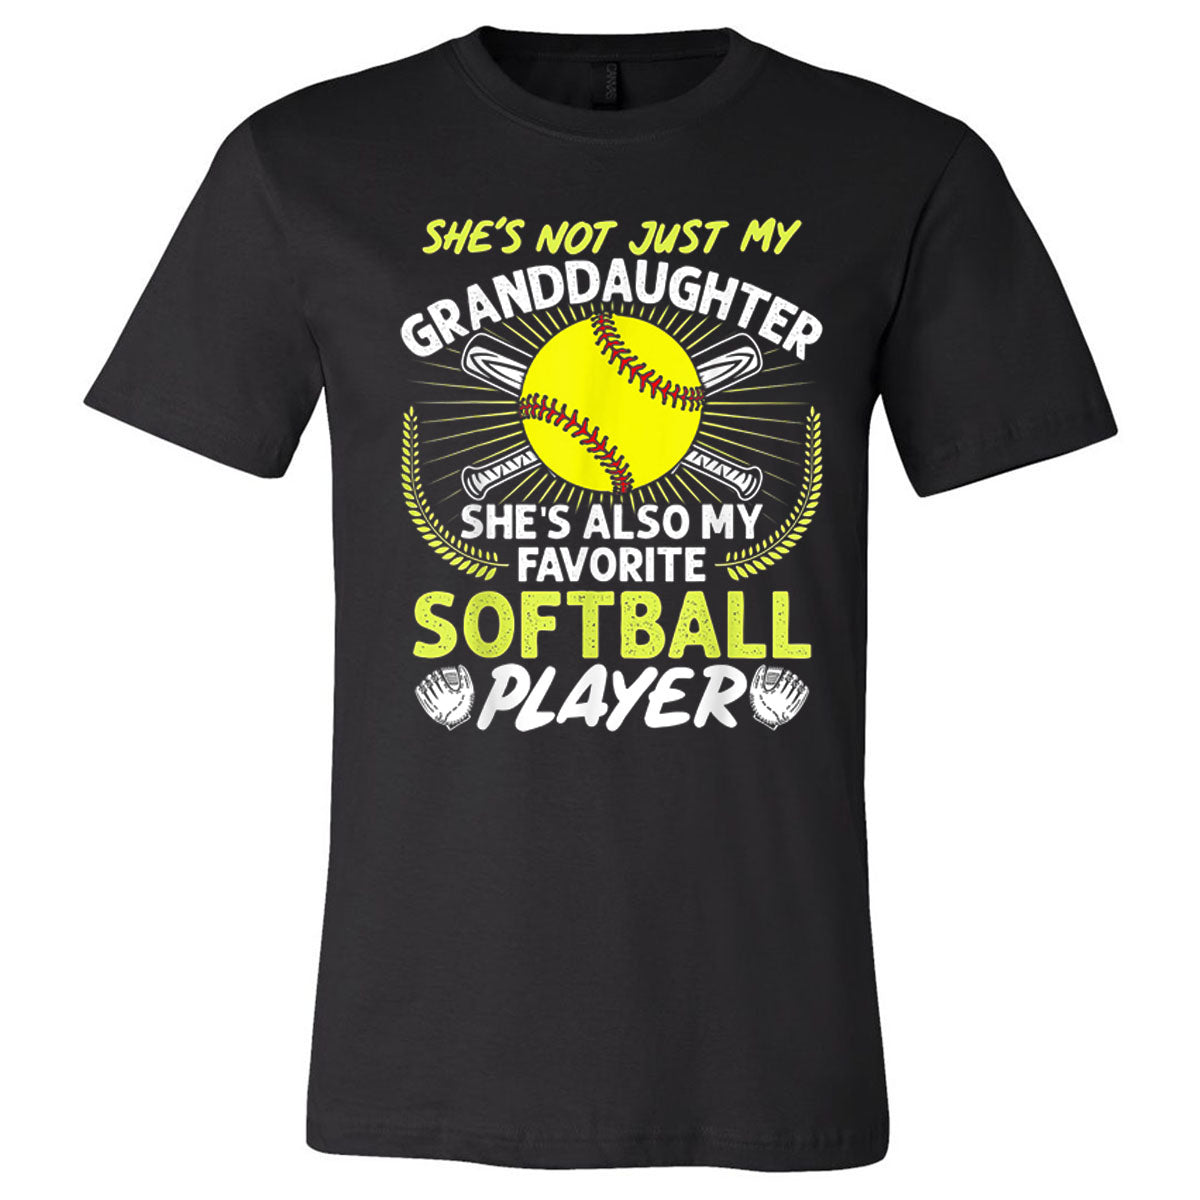 Softball - She's Not Just My Granddaughter - Black Tee - Southern Grace Creations